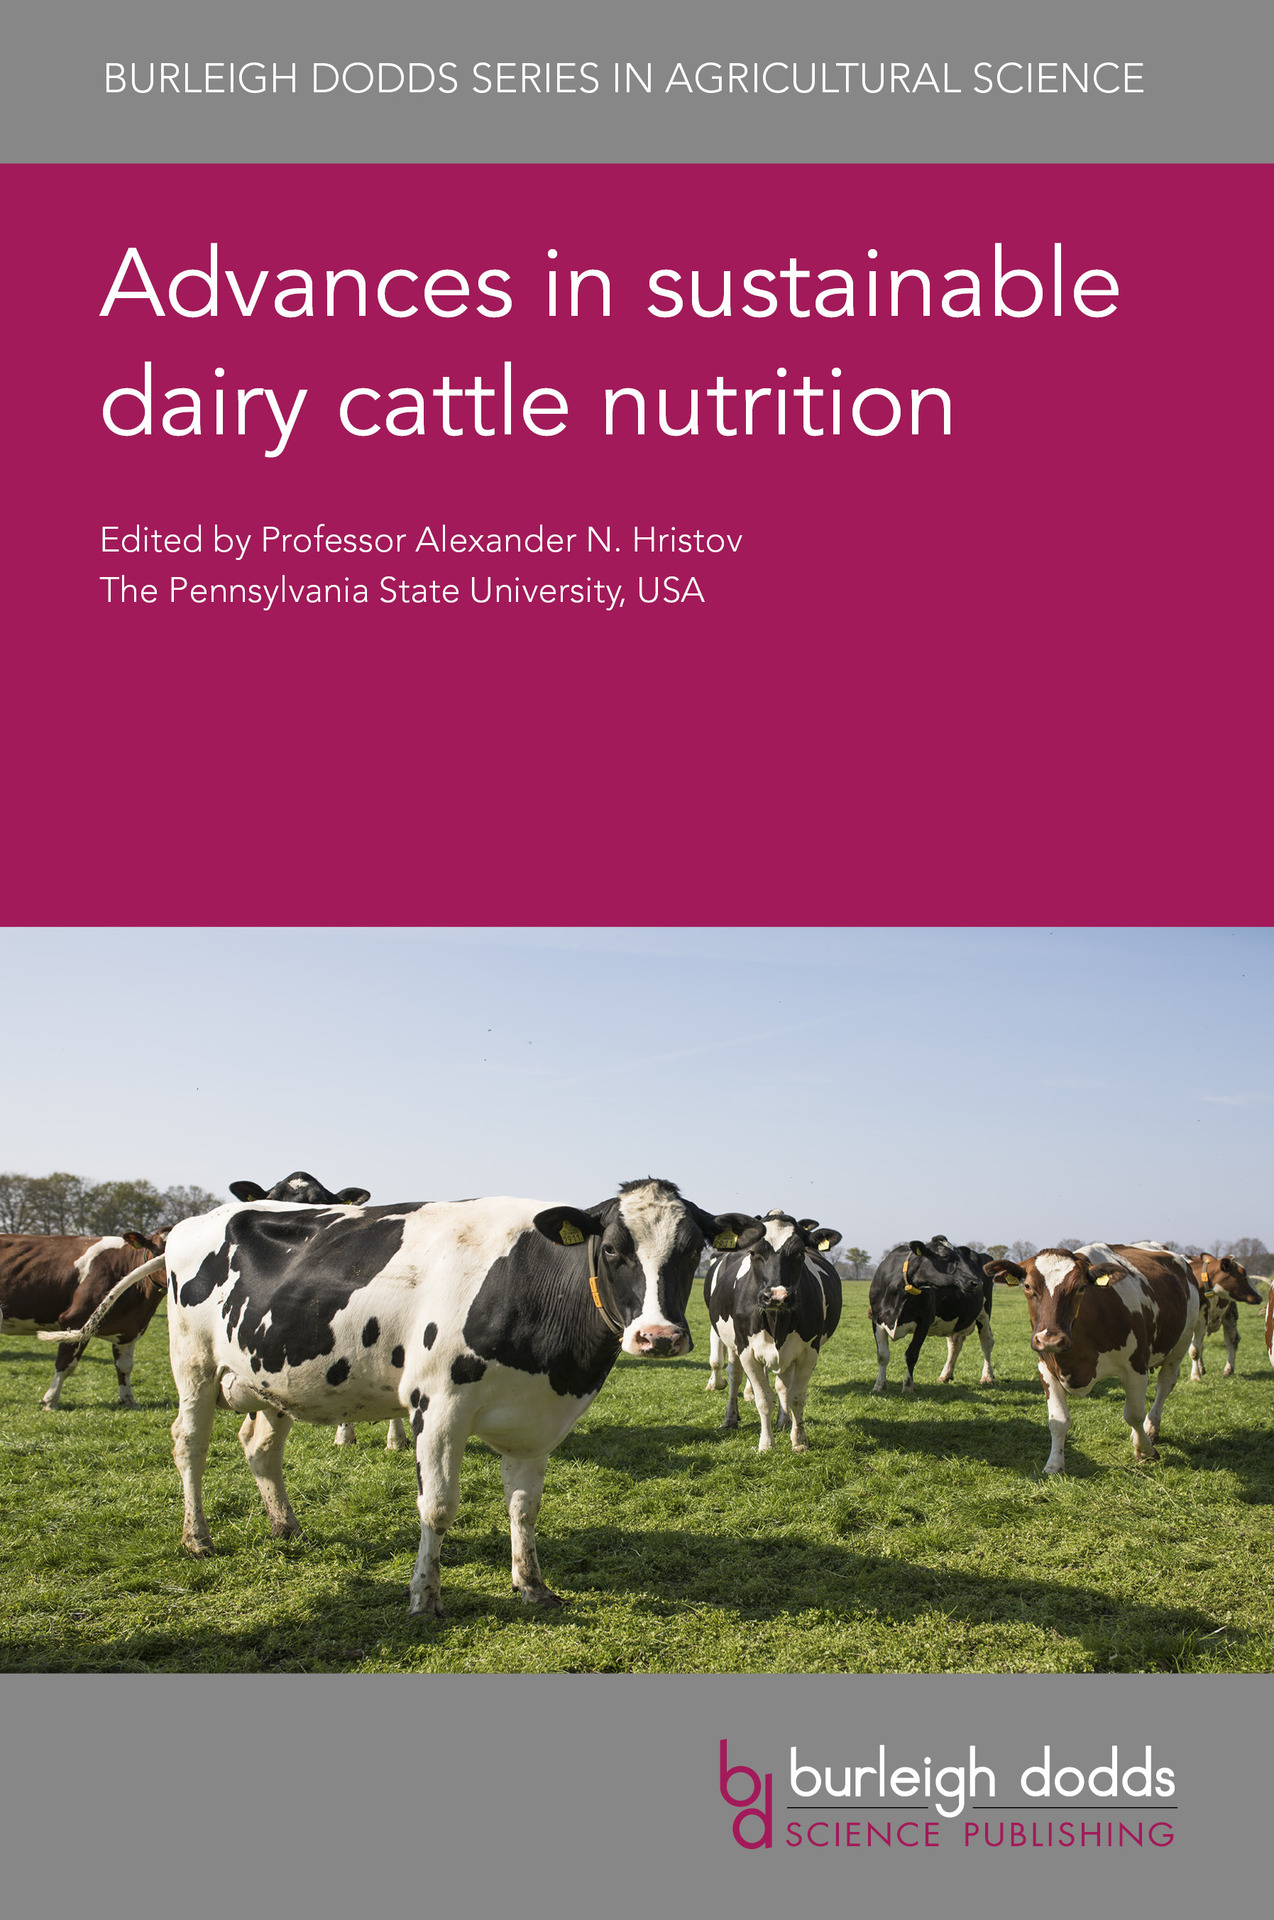 Advances in sustainable dairy cattle nutrition